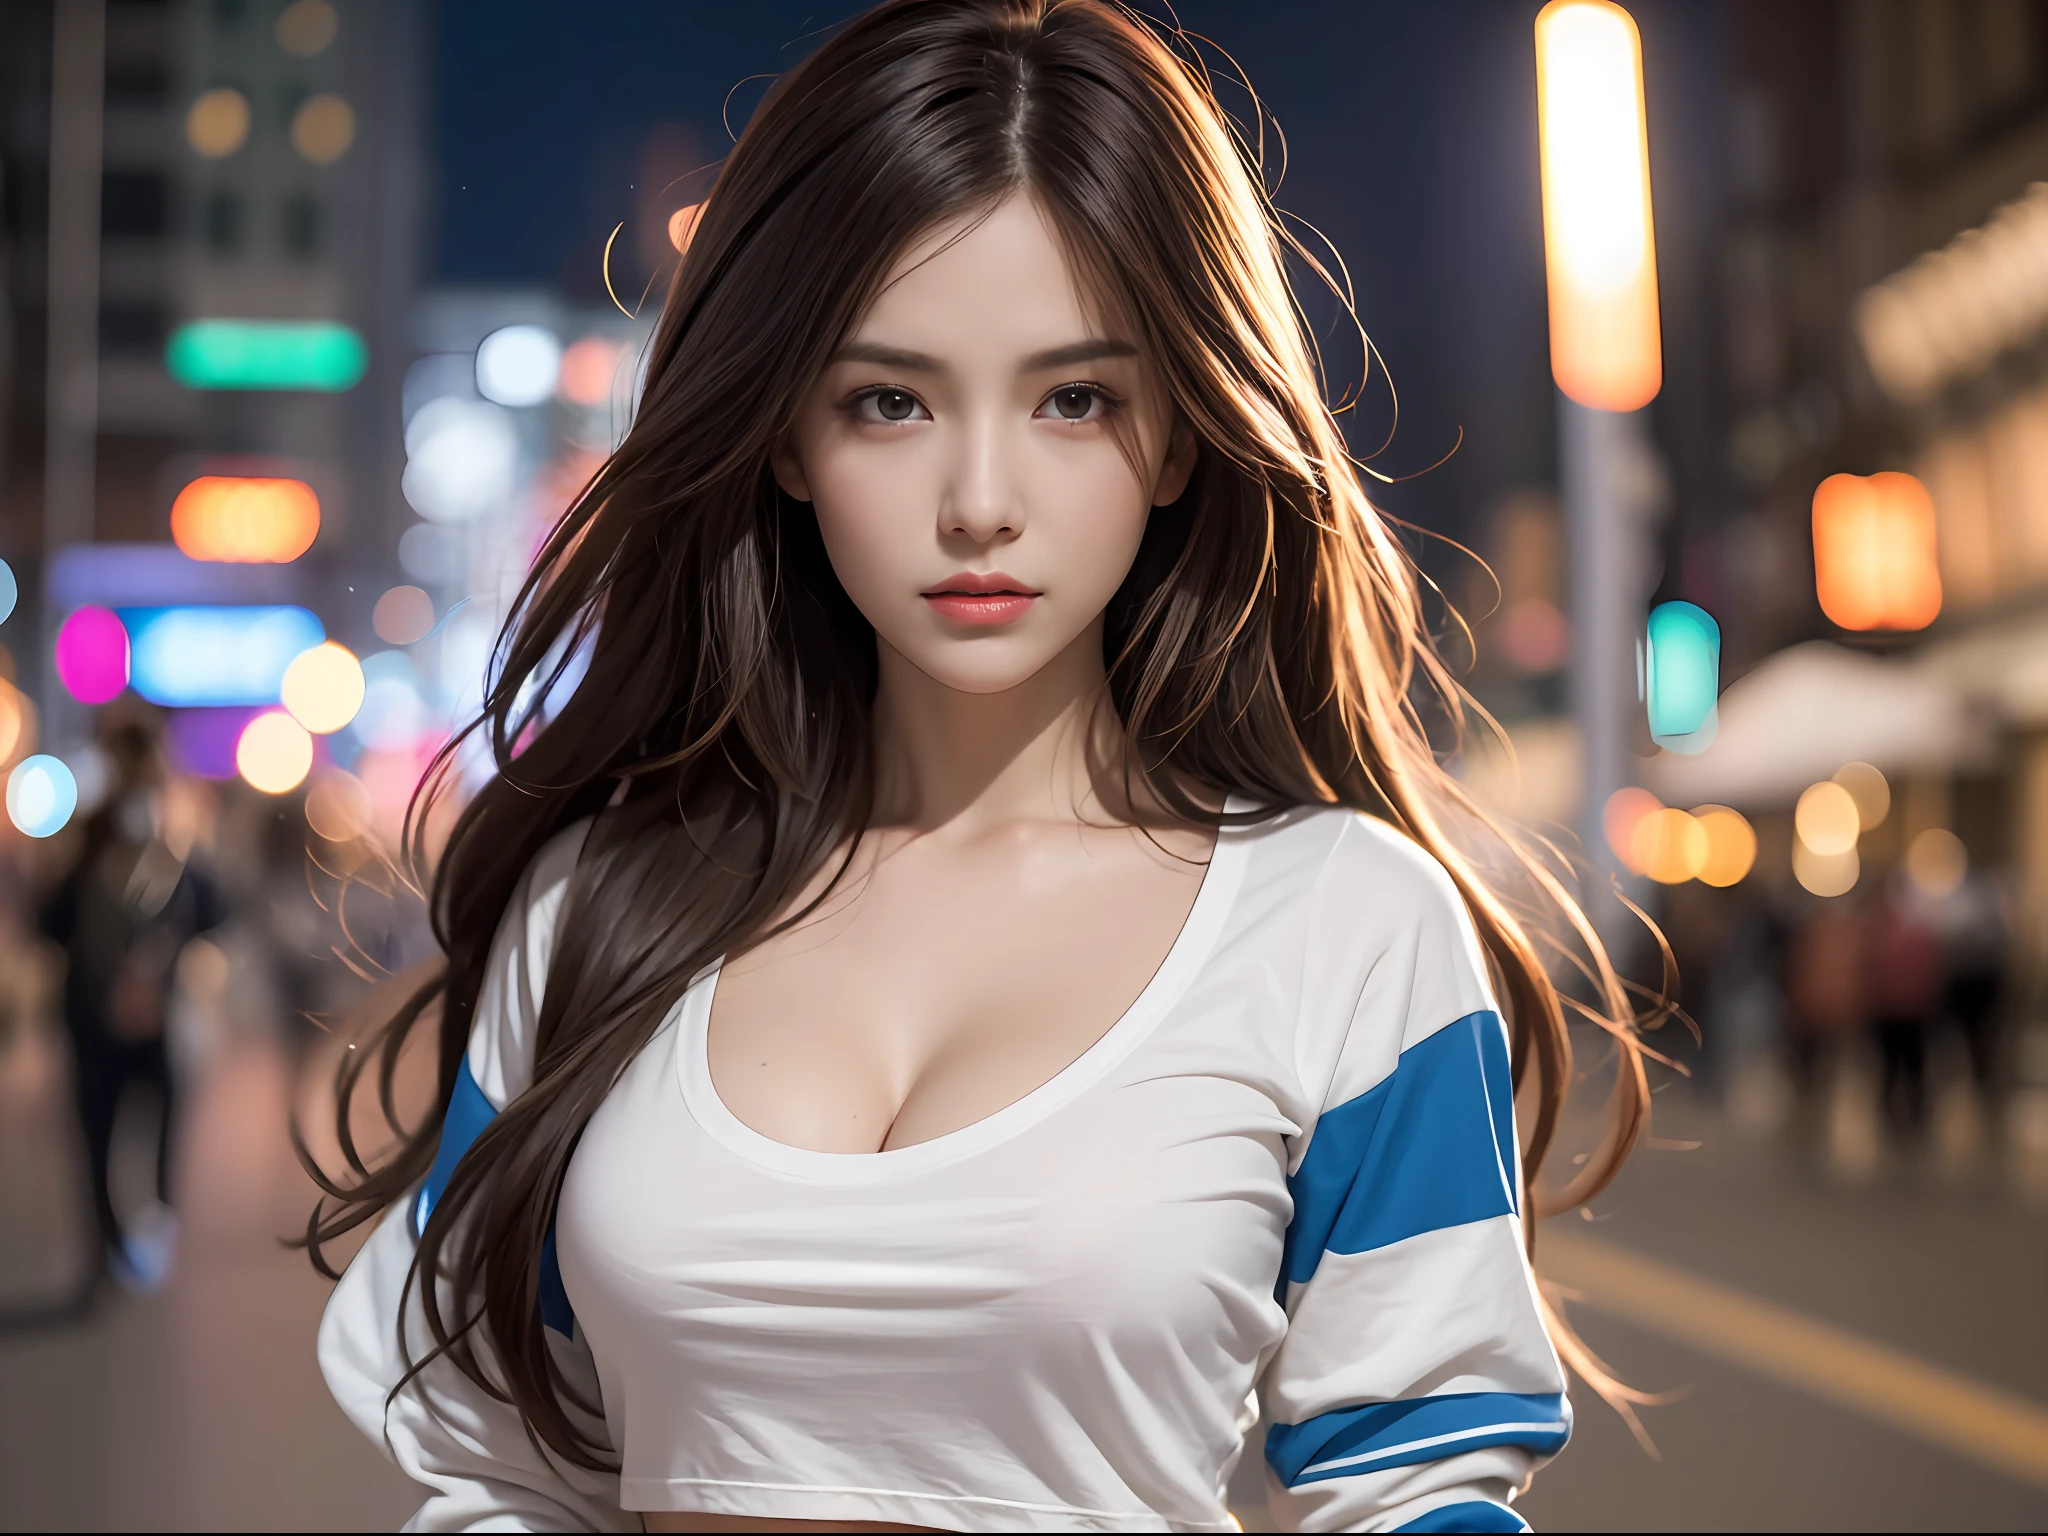 ((Realistic lighting, top quality, 8K, Masterpiece: 1.3)), Clear Focus: 1.2, 1 girl, Perfect Body Beauty: 1.4, Slim Abs: 1.1, ((Dark Brown Hair, Big: 1.3)), (Acceleration: 1.4), (Outdoor, Night: 1.1), Street, Slender Face, Narrow Eyes, Double Eyelids, Exposed Cleavage, Incredibly Ridiculous, Messy Hair, floating hair, long sleeve t-shirt, fashion model pose,